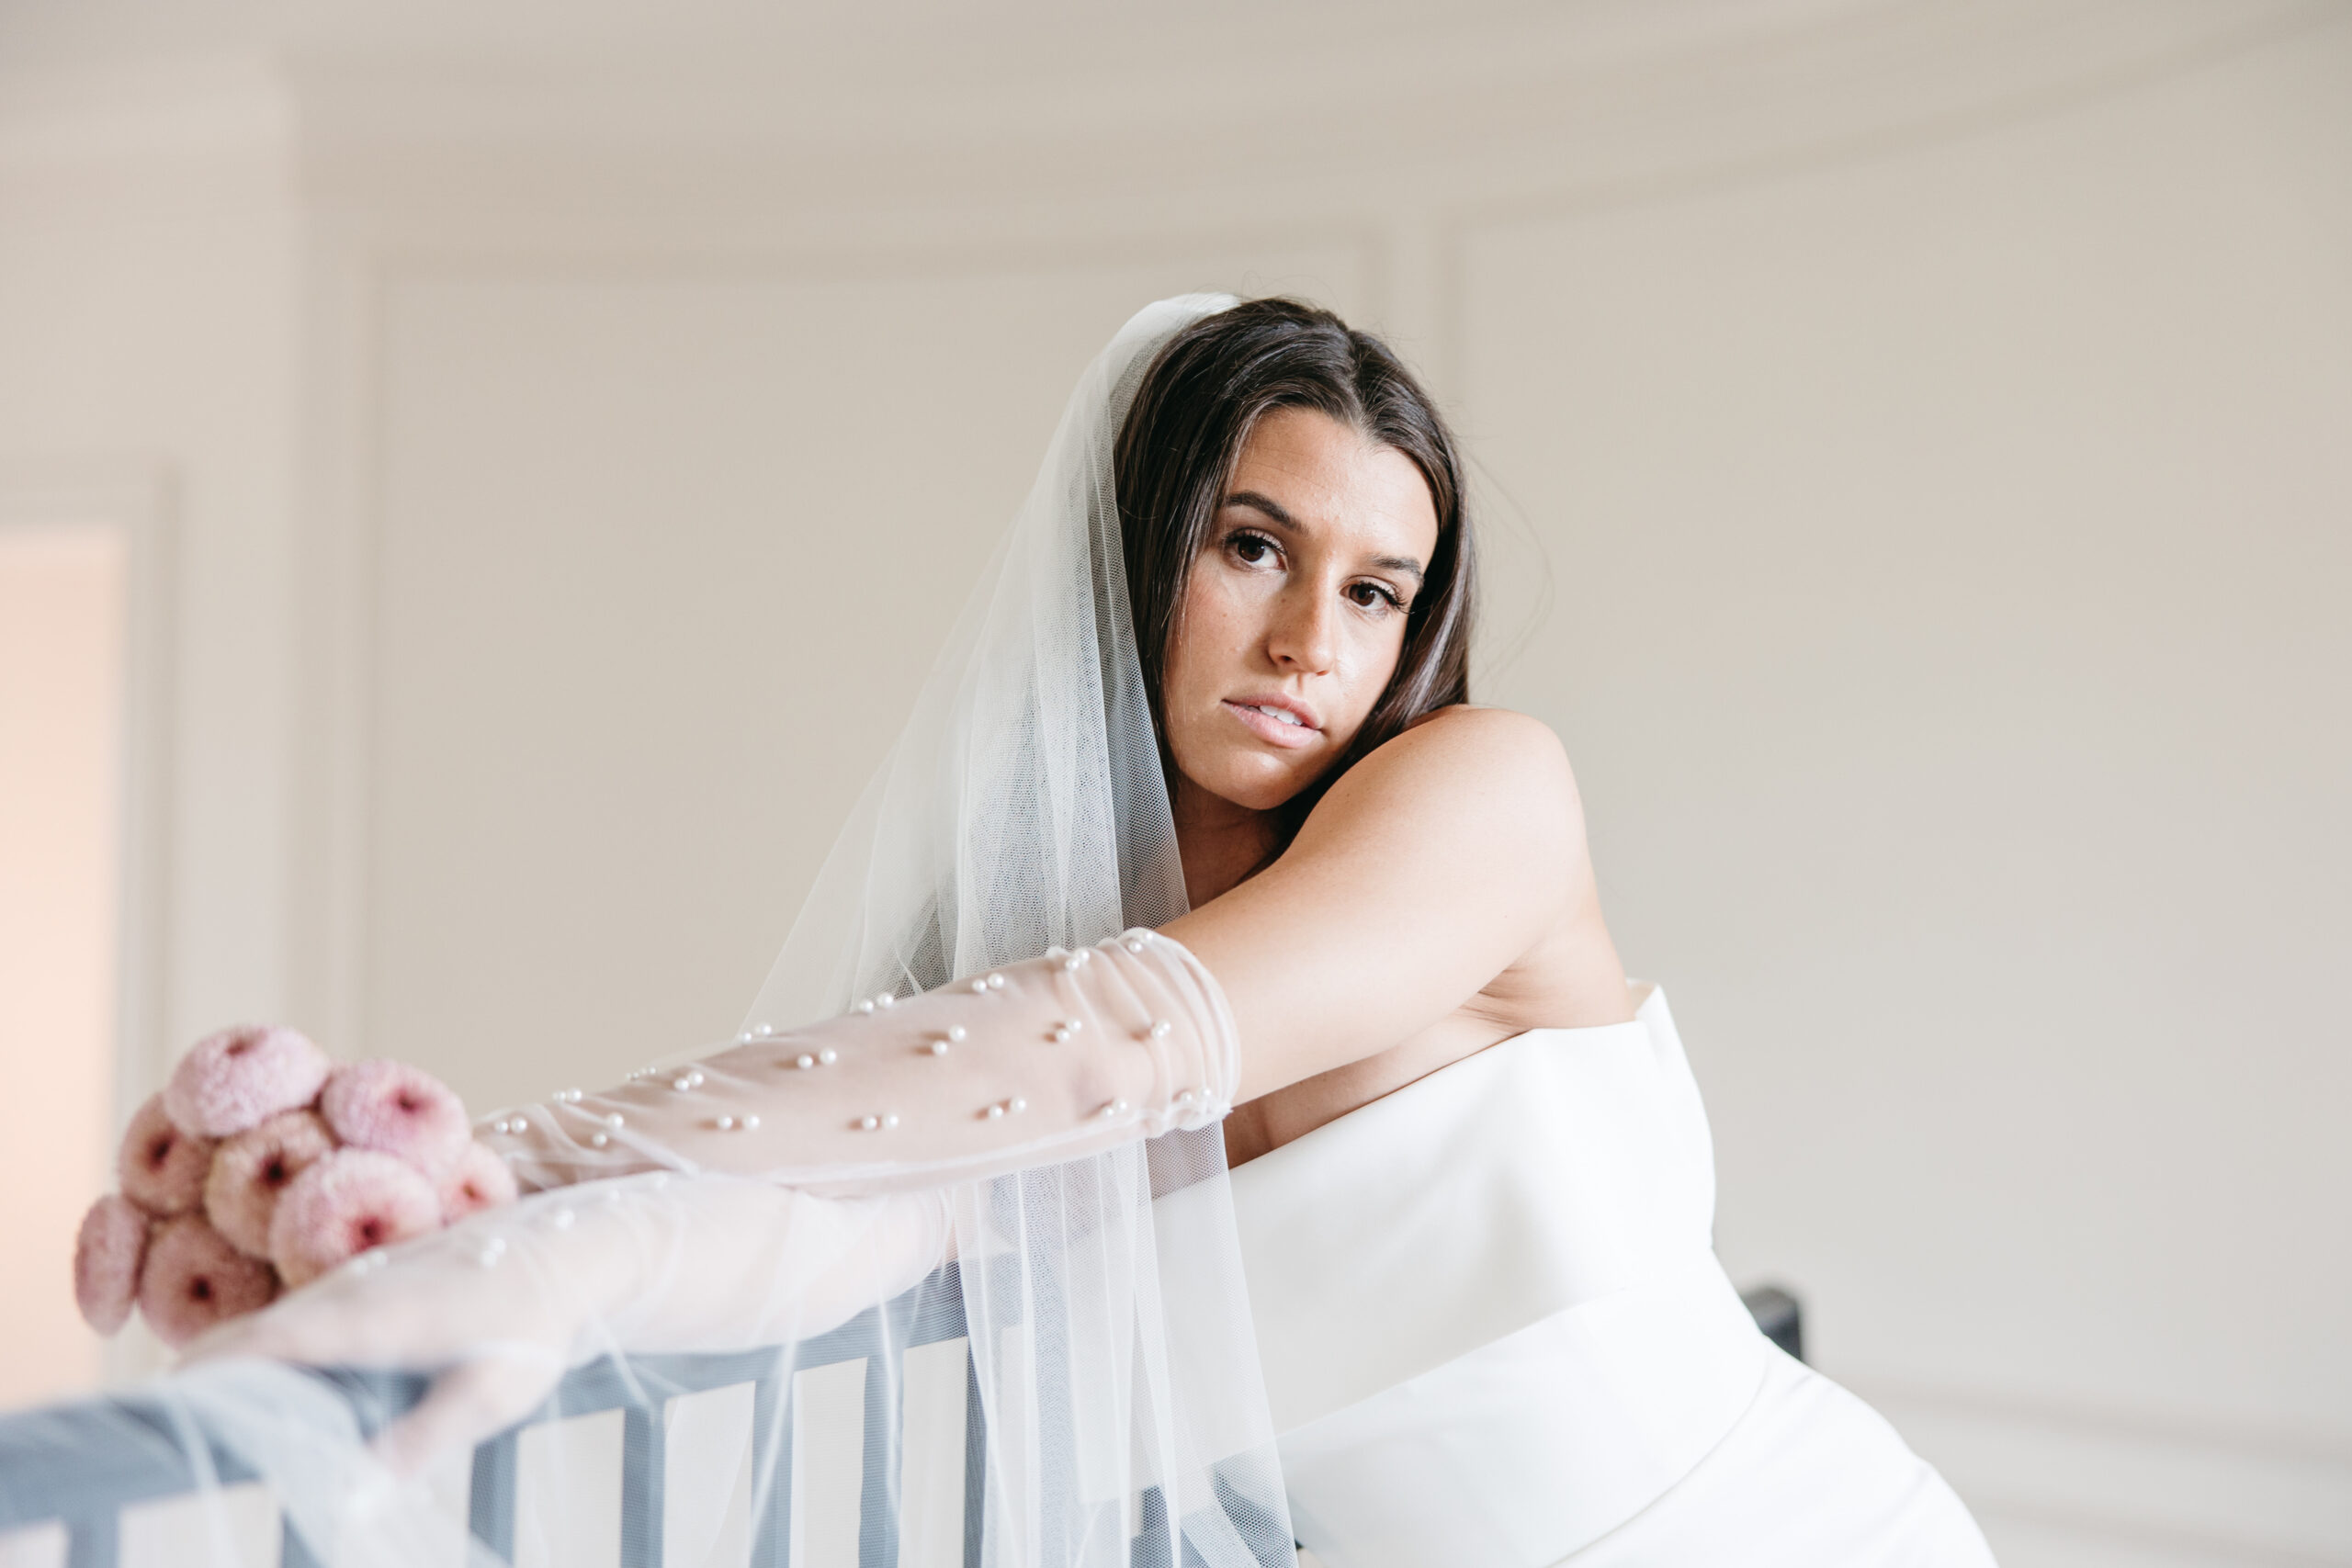 Kayla's Bridal session at The Hillside Estate in Dallas, Texas was one to remember. As a wedding planner herself, Kayla had a beautiful vision for this day.